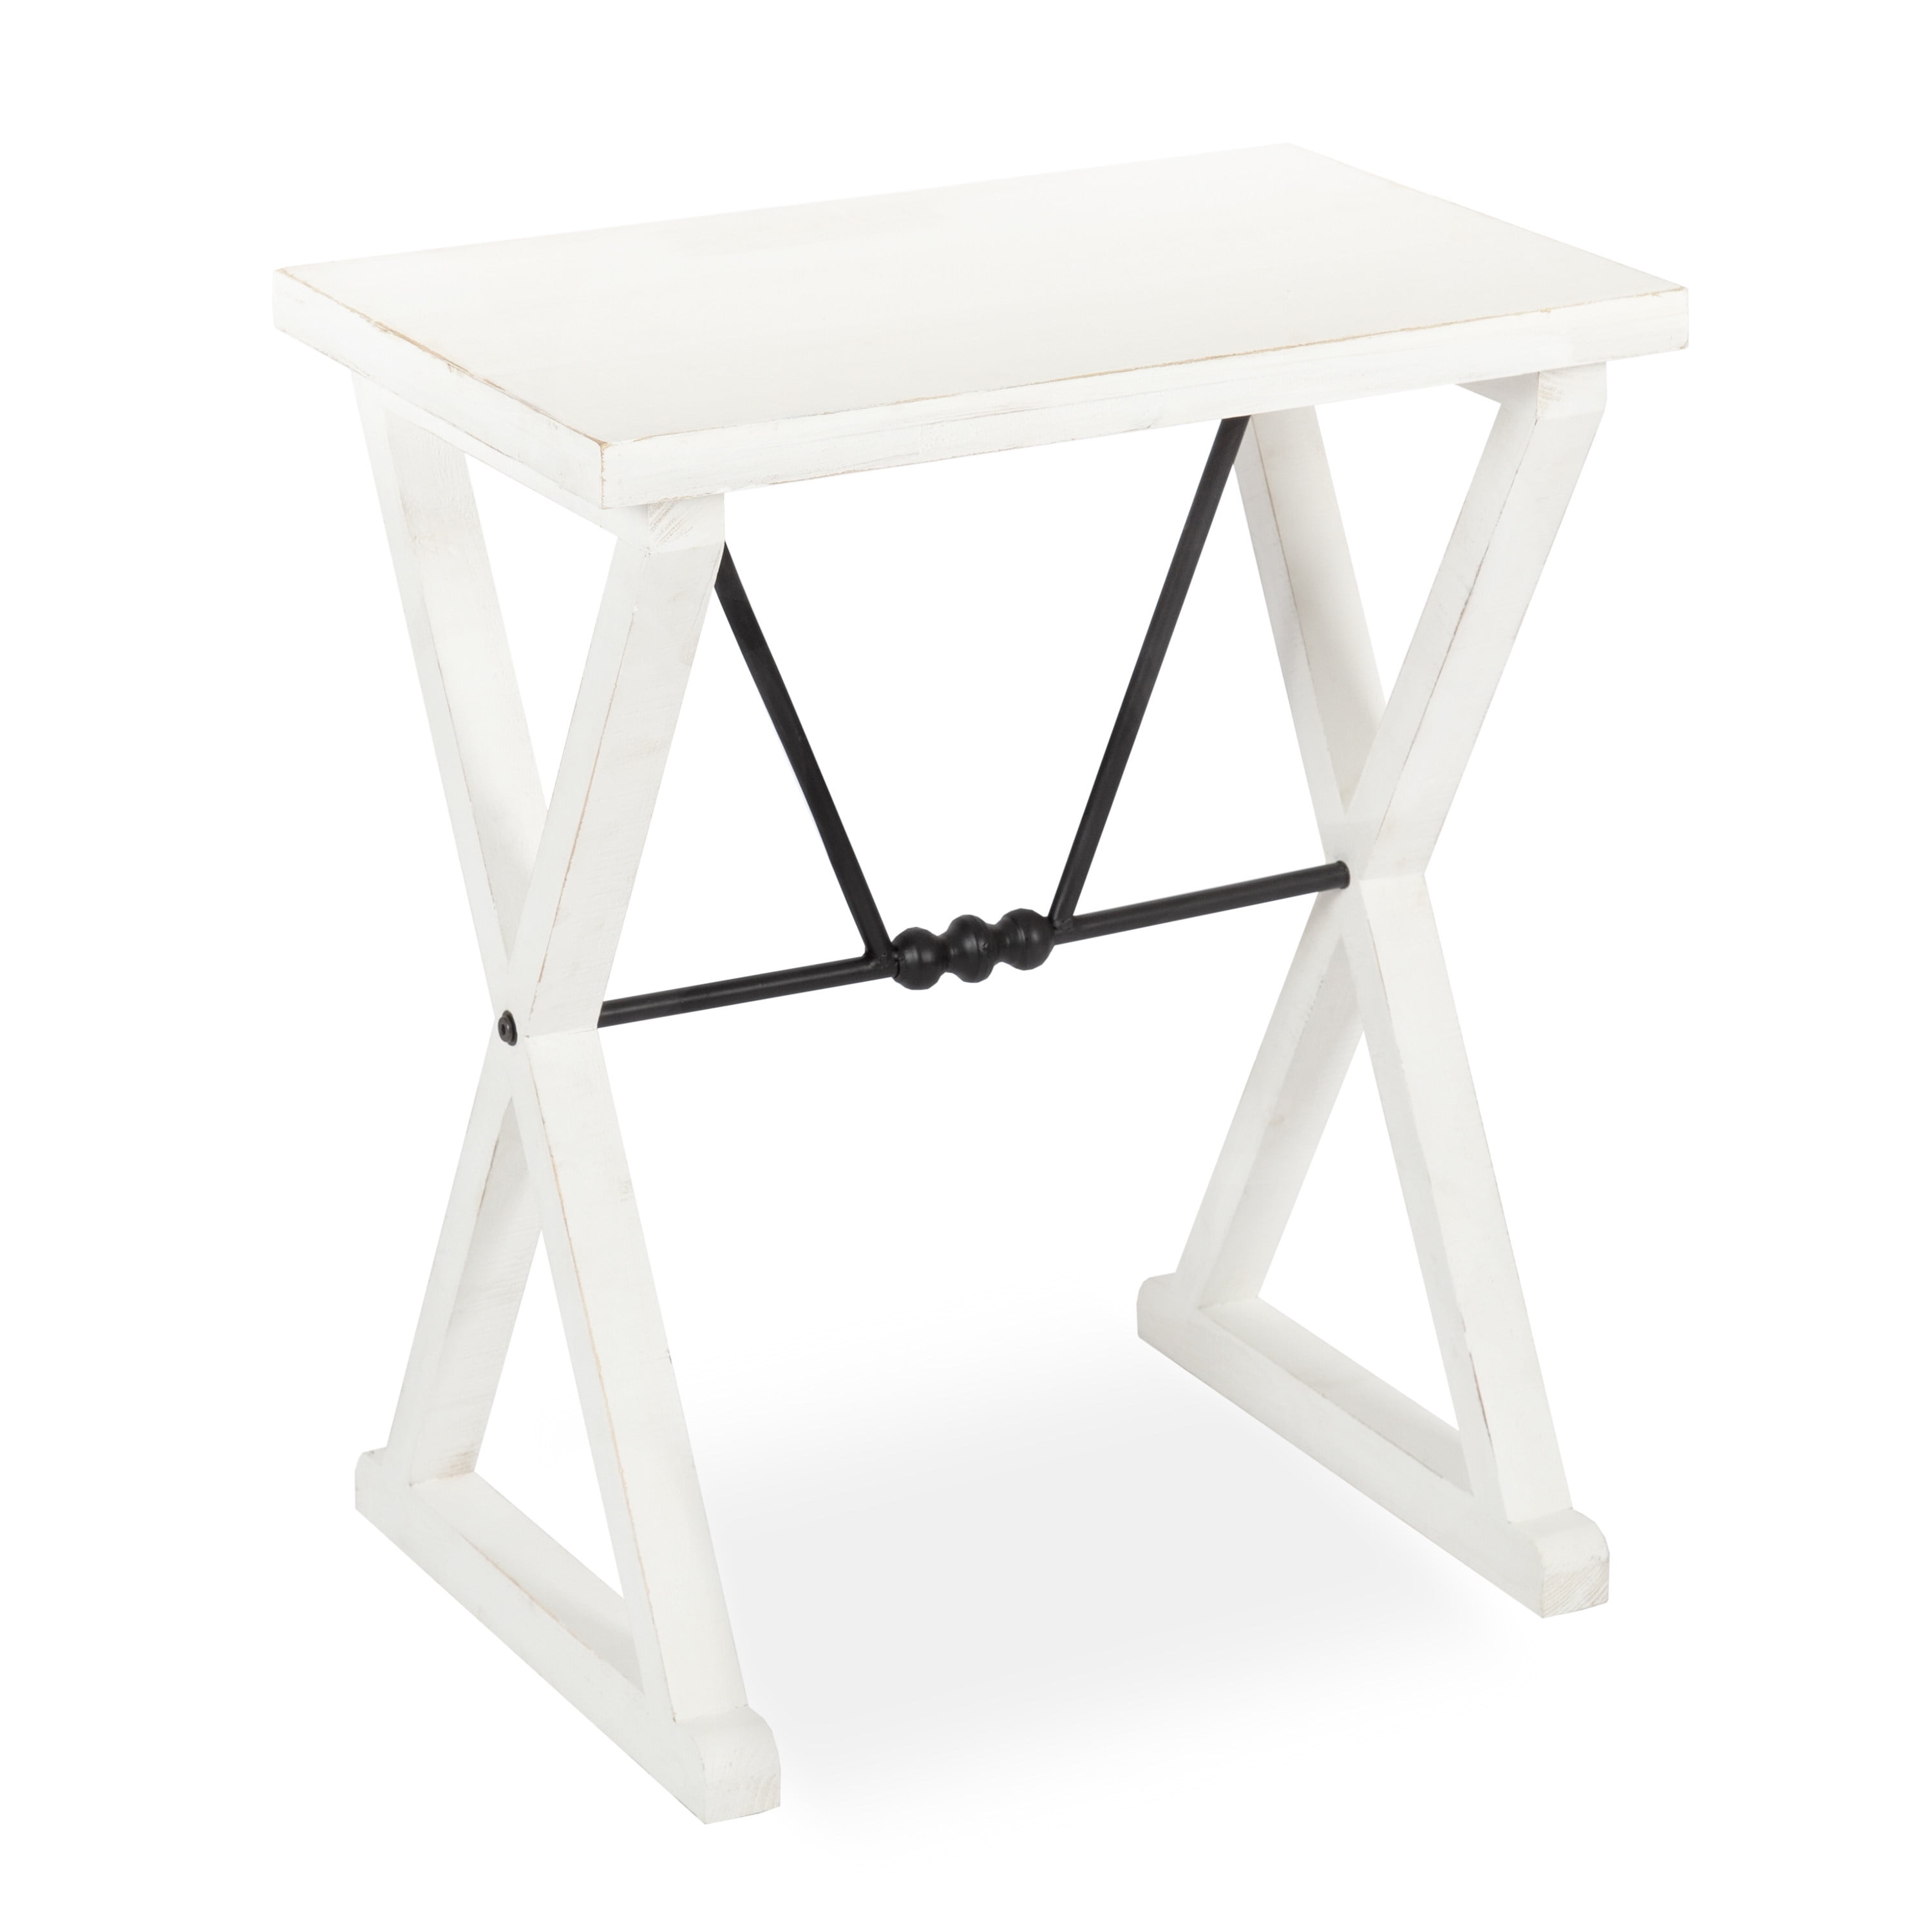 22 x 14 x 26 Farmhouse End Table for Display and Storage White Kate and Laurel Travere Rustic Side Table